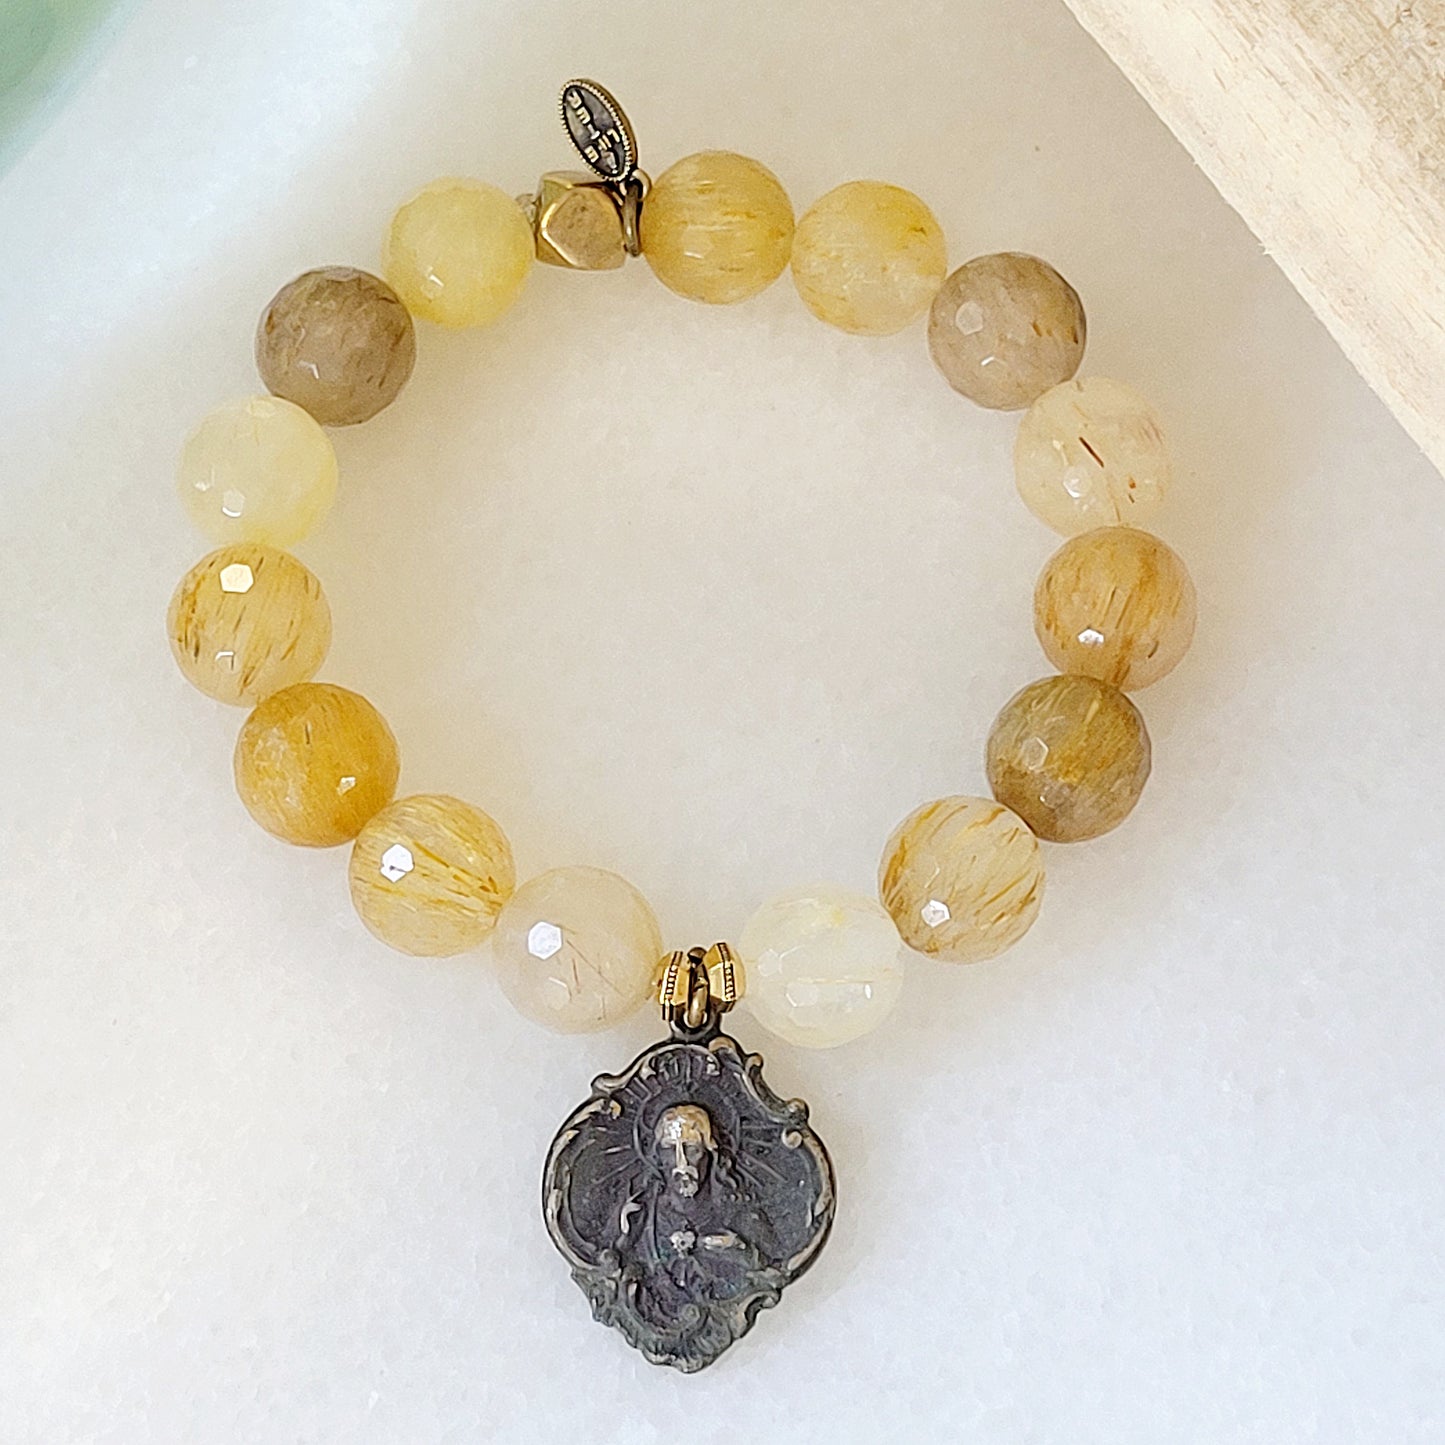 Rutilated Quartz Faceted 12mm Beaded Bracelet w/ Sacred Heart of Jesus / St. Therese of Lisieux Medal